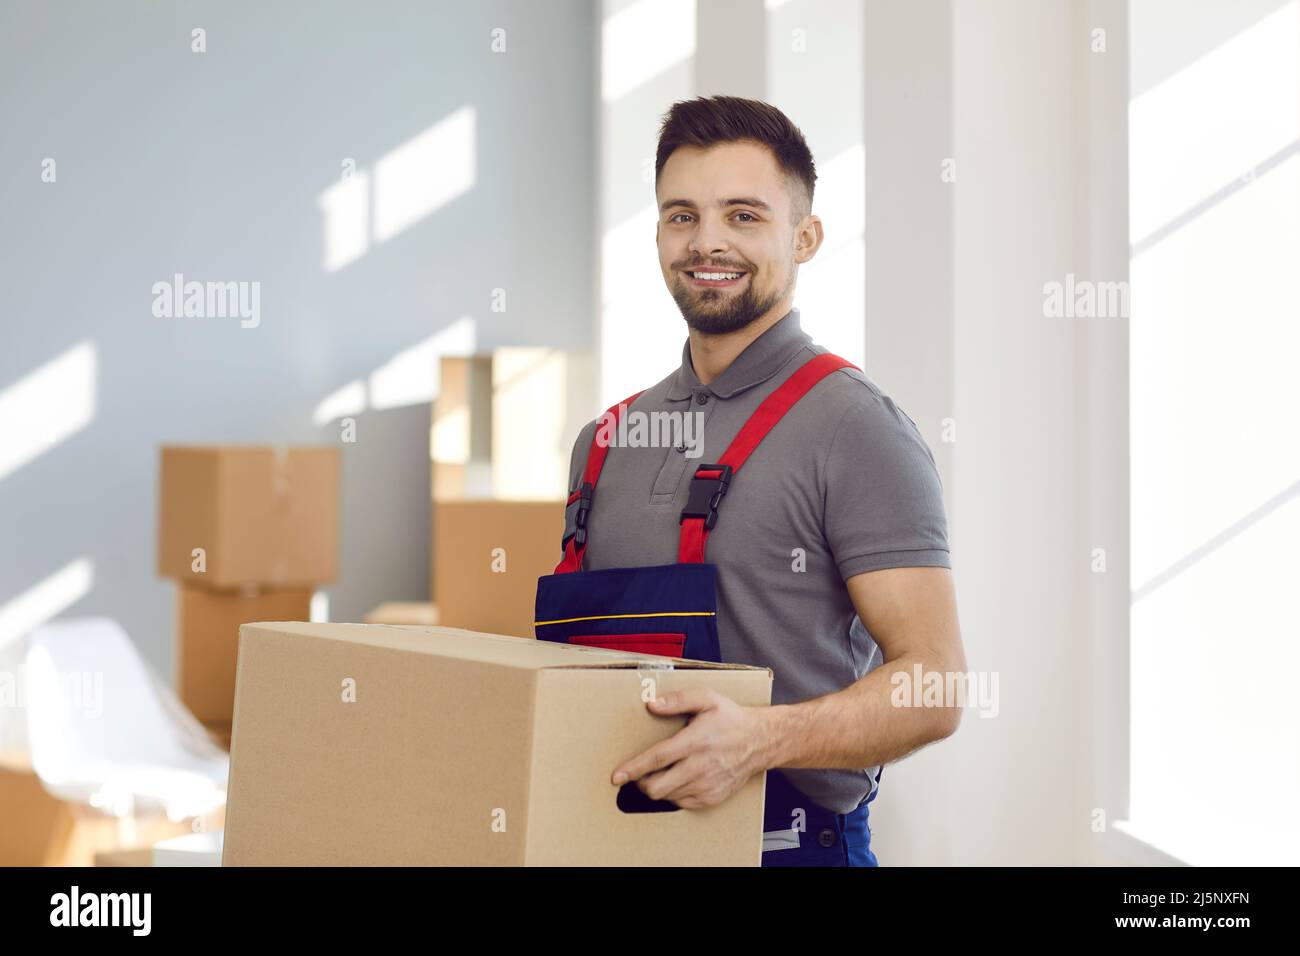 Happy delivery service or moving company worker holding cardboard box and smiling Stock Photo